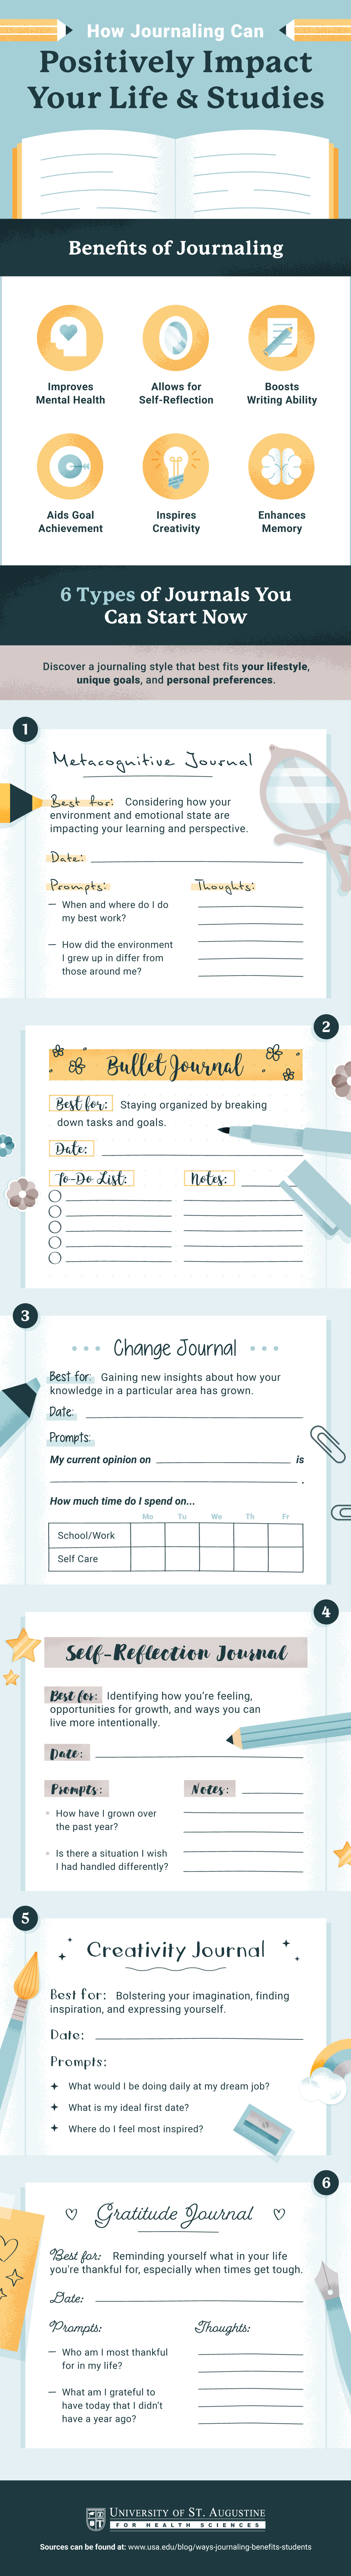 6 Ways Journaling Can Support Your Growth